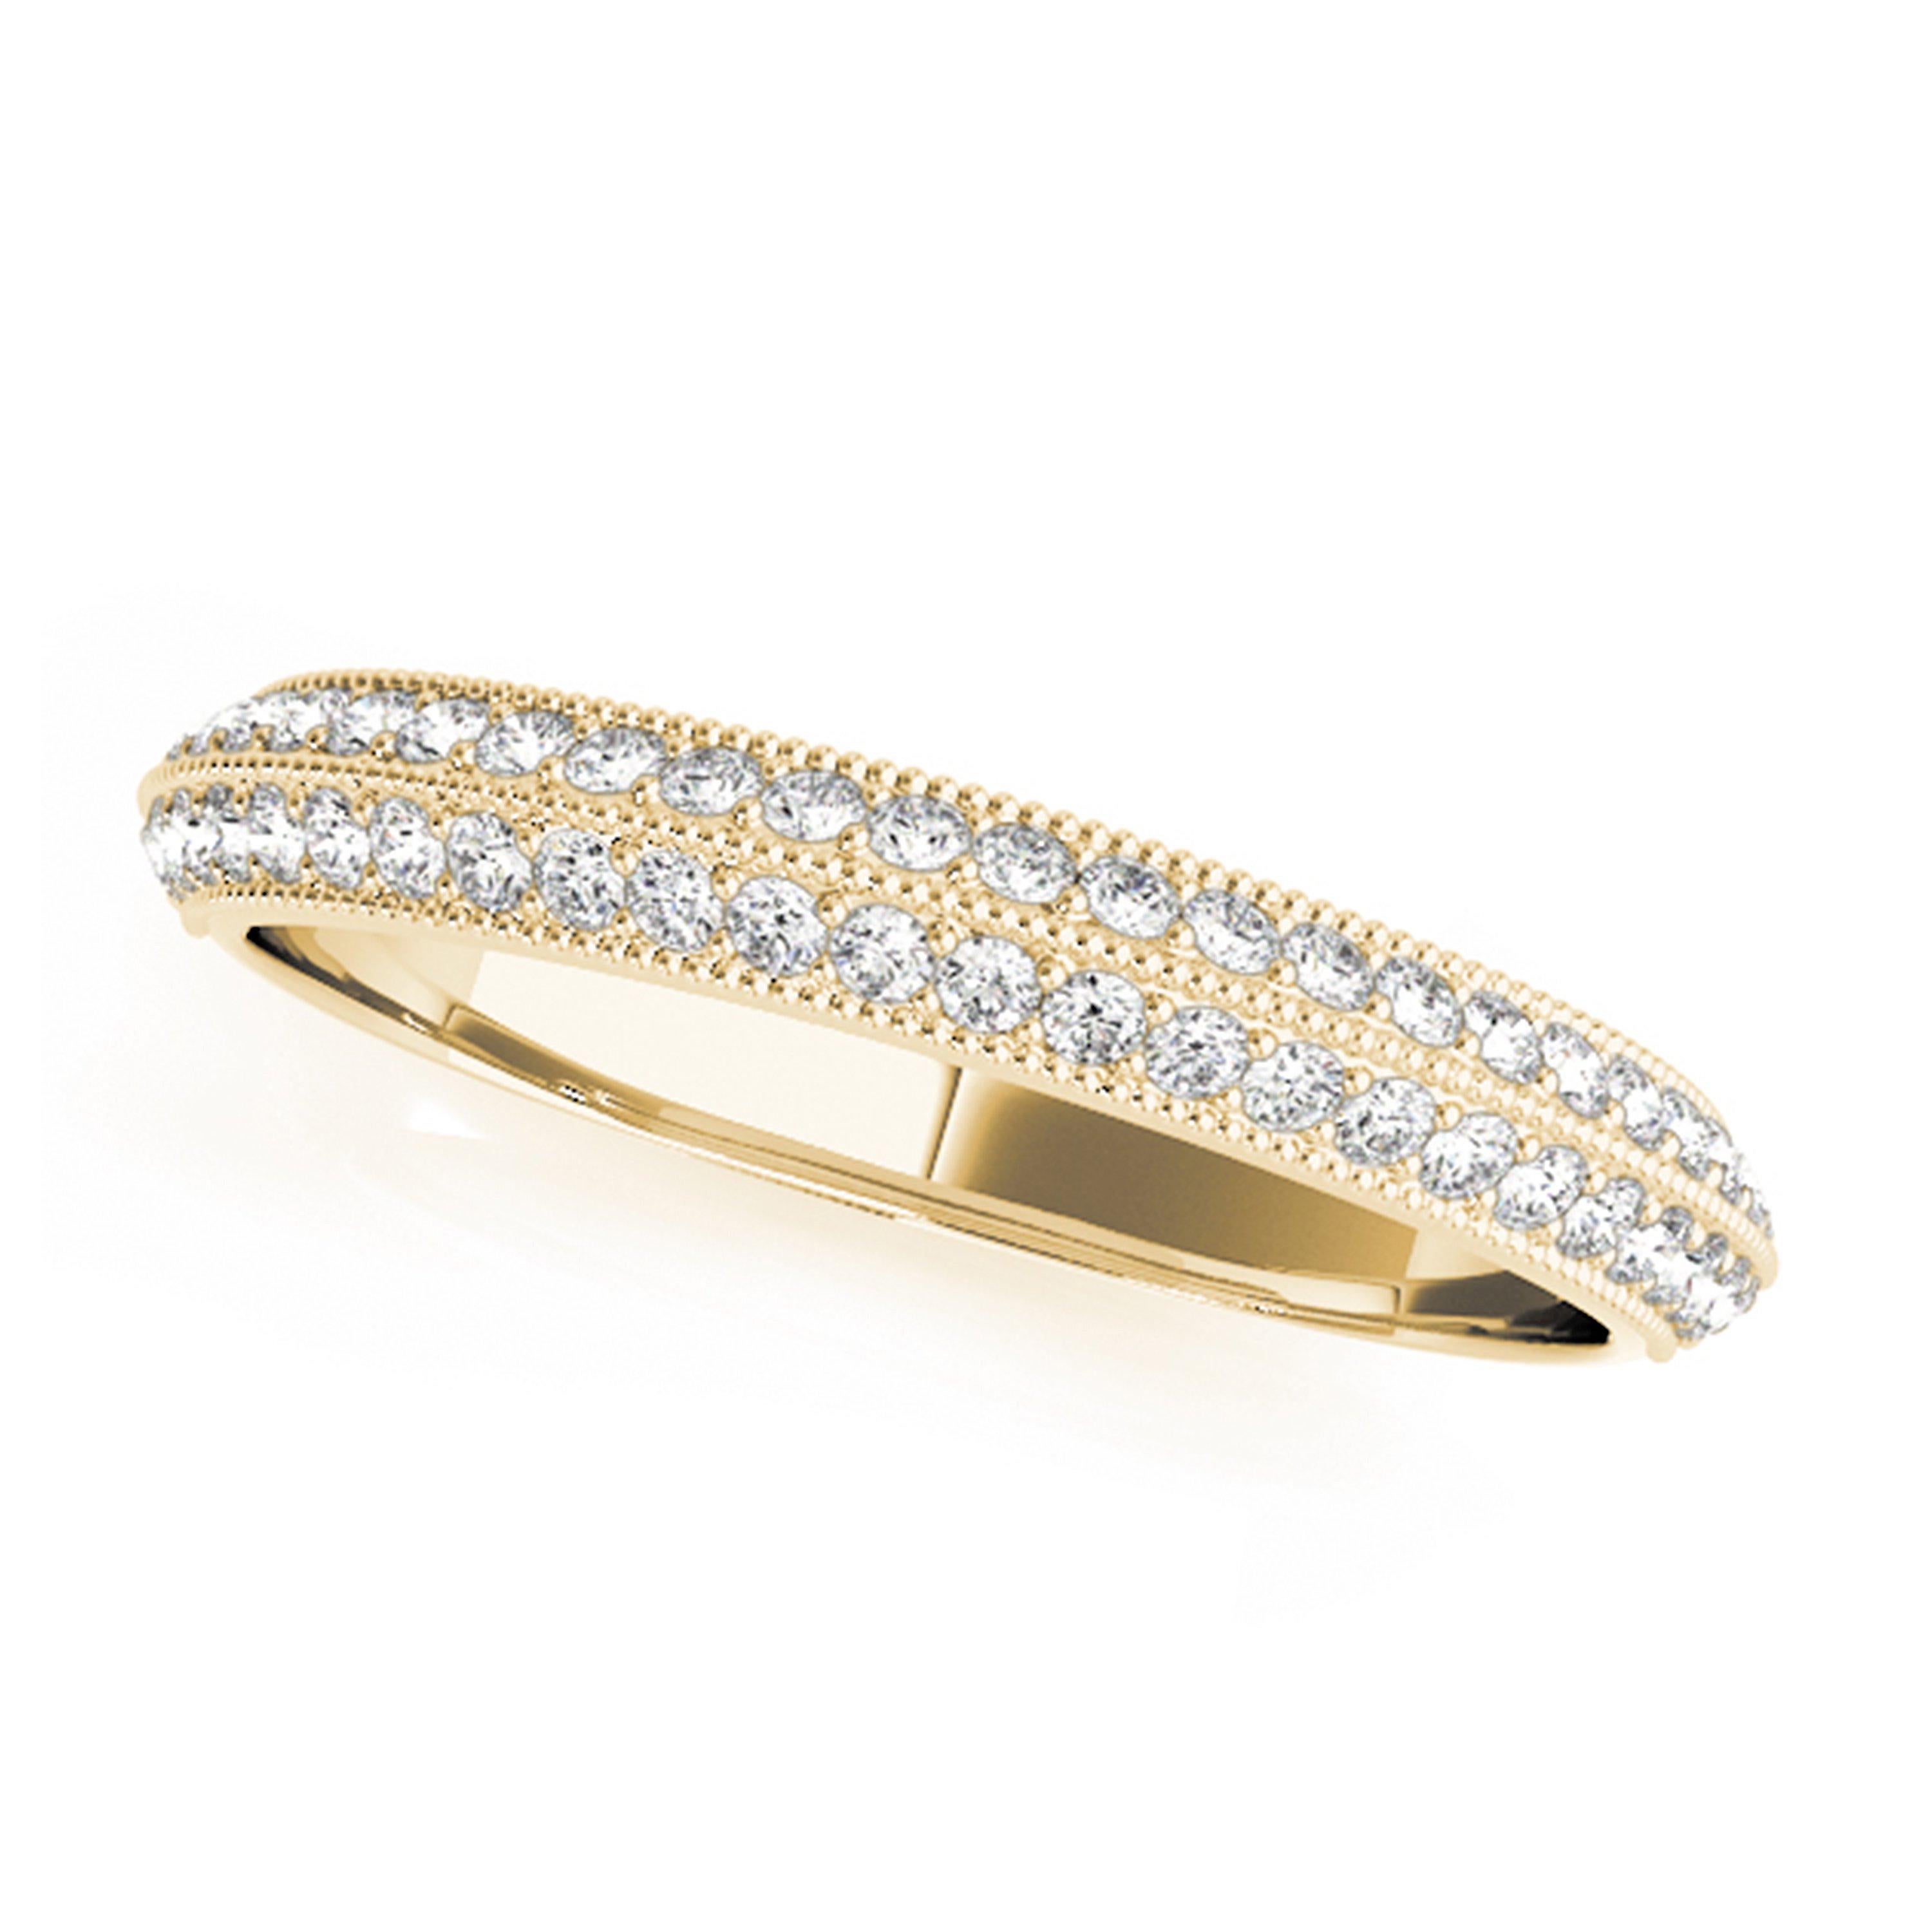 Material: 14k Yellow Gold 
Diamond Details: 50 White Diamonds at 0.31 Carats - Clarity: SI / Color: H-I

Ring Size: Size 7 (can be sized)
Fine one-of-a-kind craftsmanship meets incredible quality in this breathtaking piece of jewelry.

All Alberto